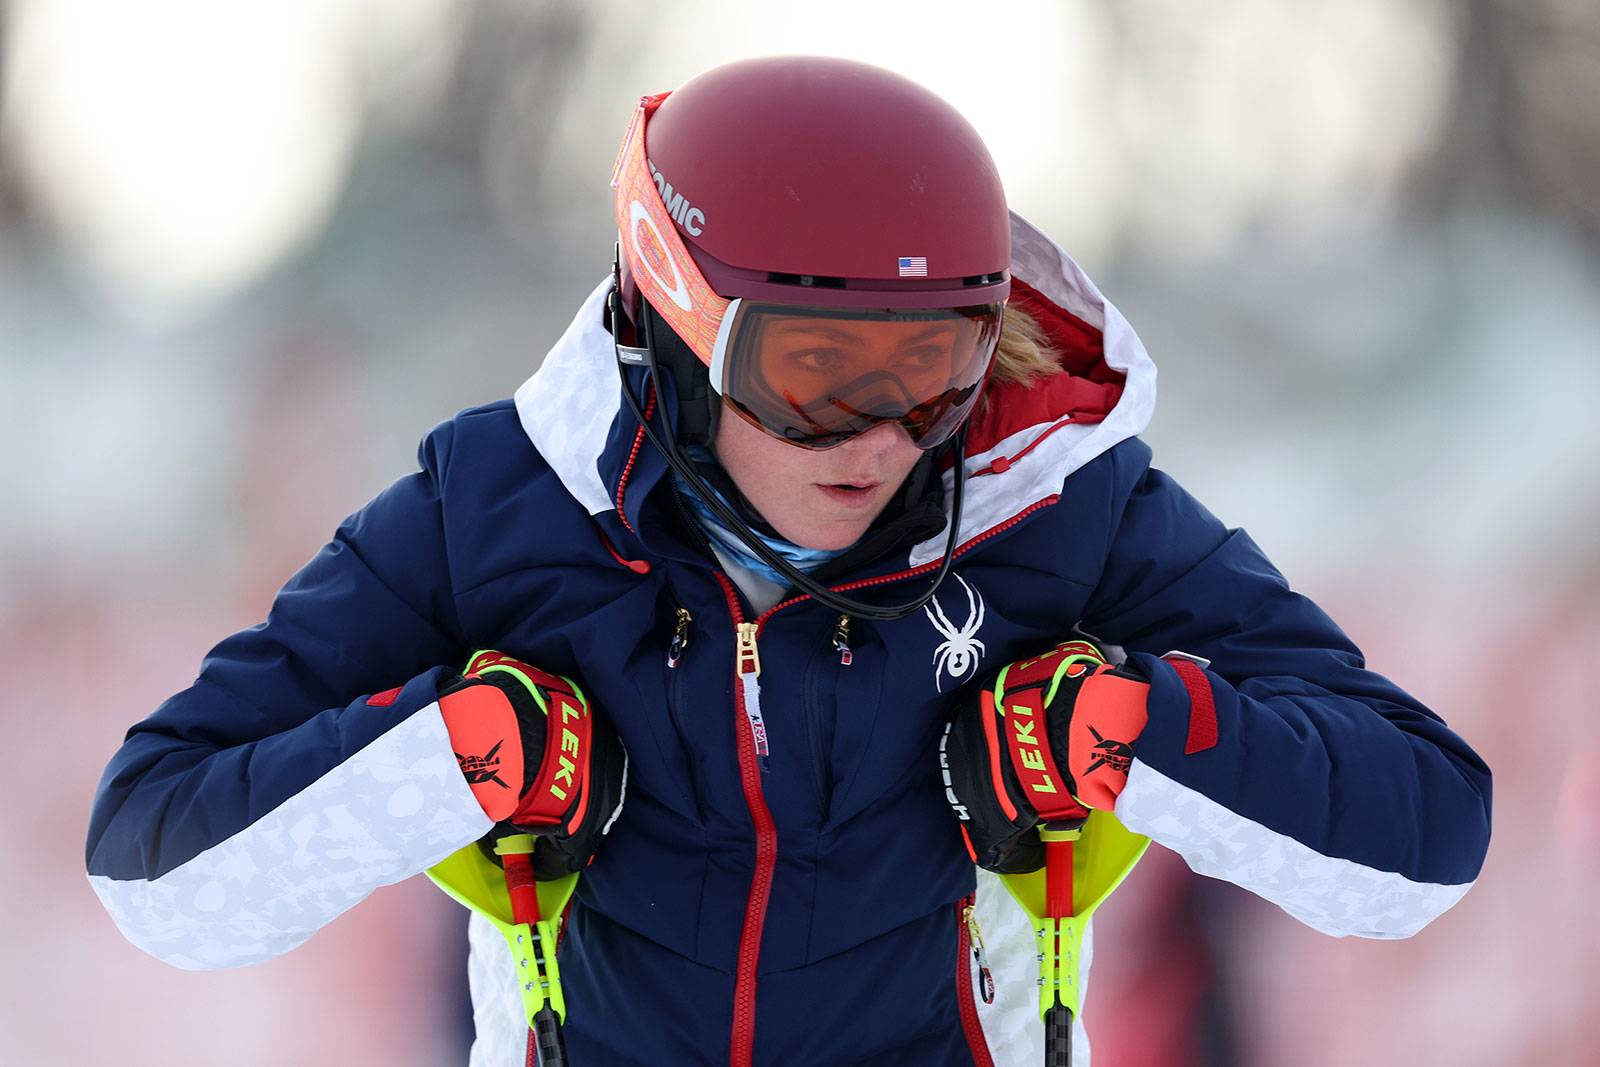 Three-time Olympic medalist Mikaela Shiffrin crashed out of her second event on Wednesday.